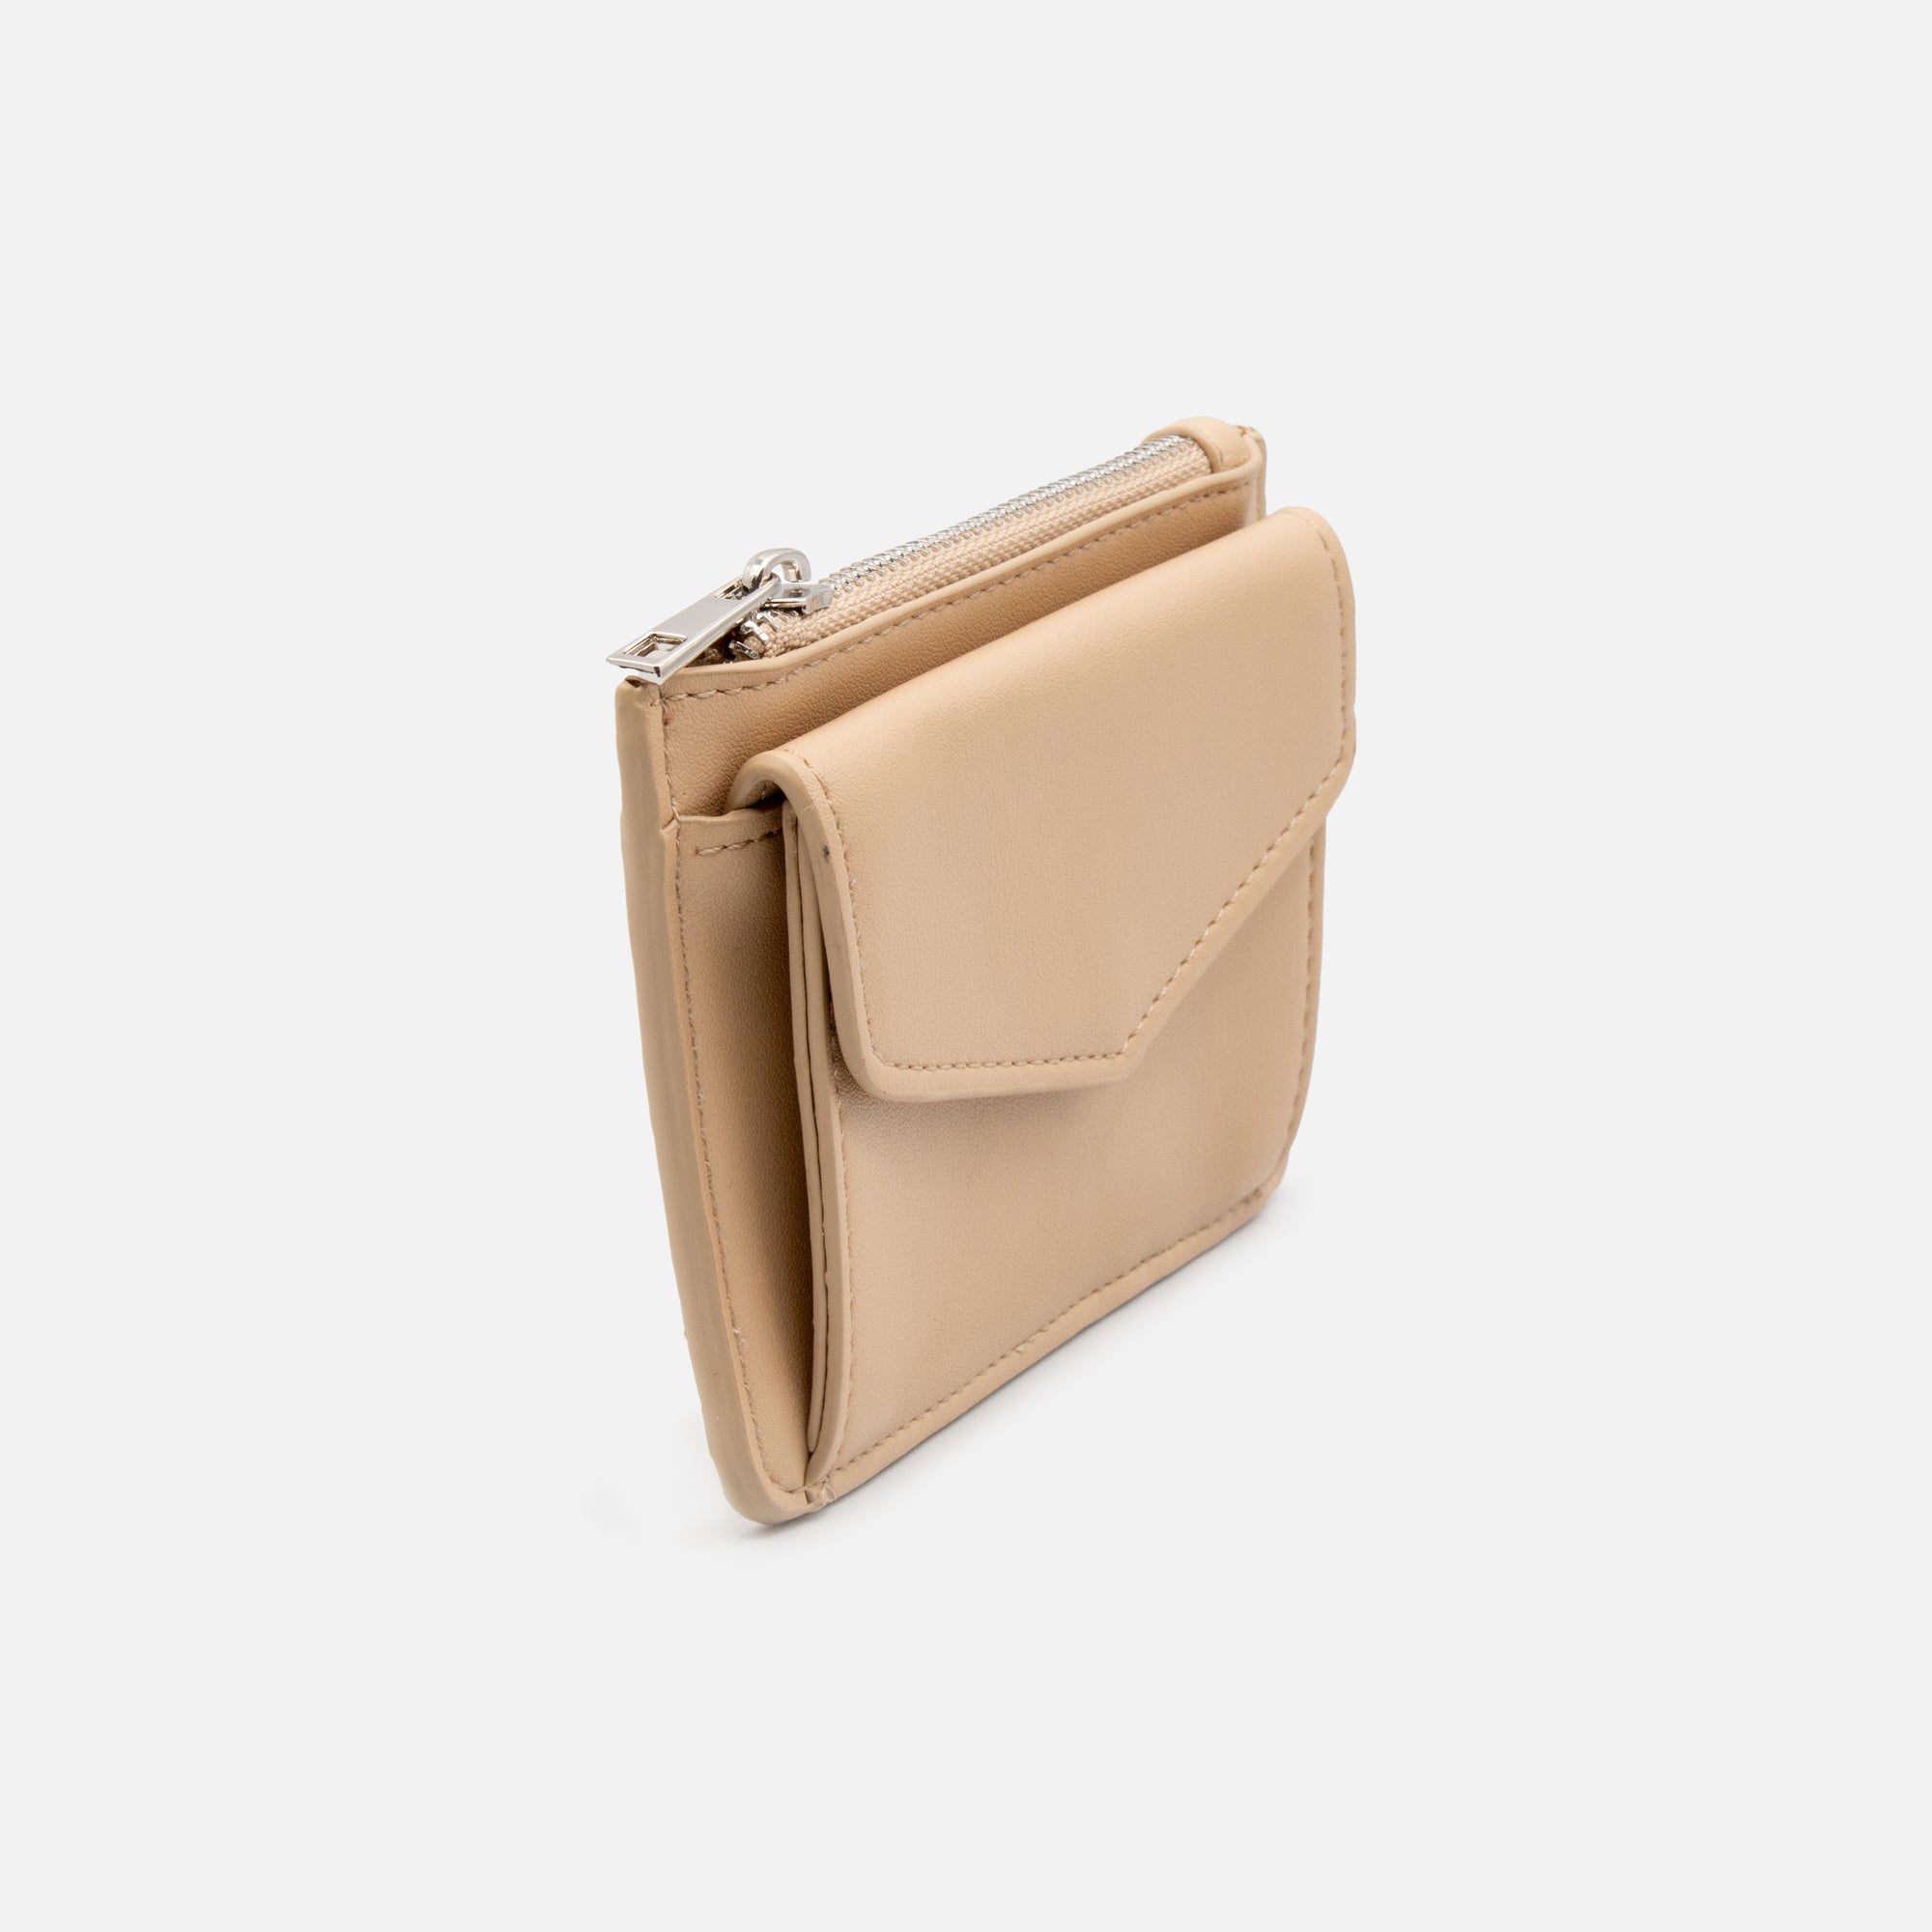 Small beige card holder with zipper